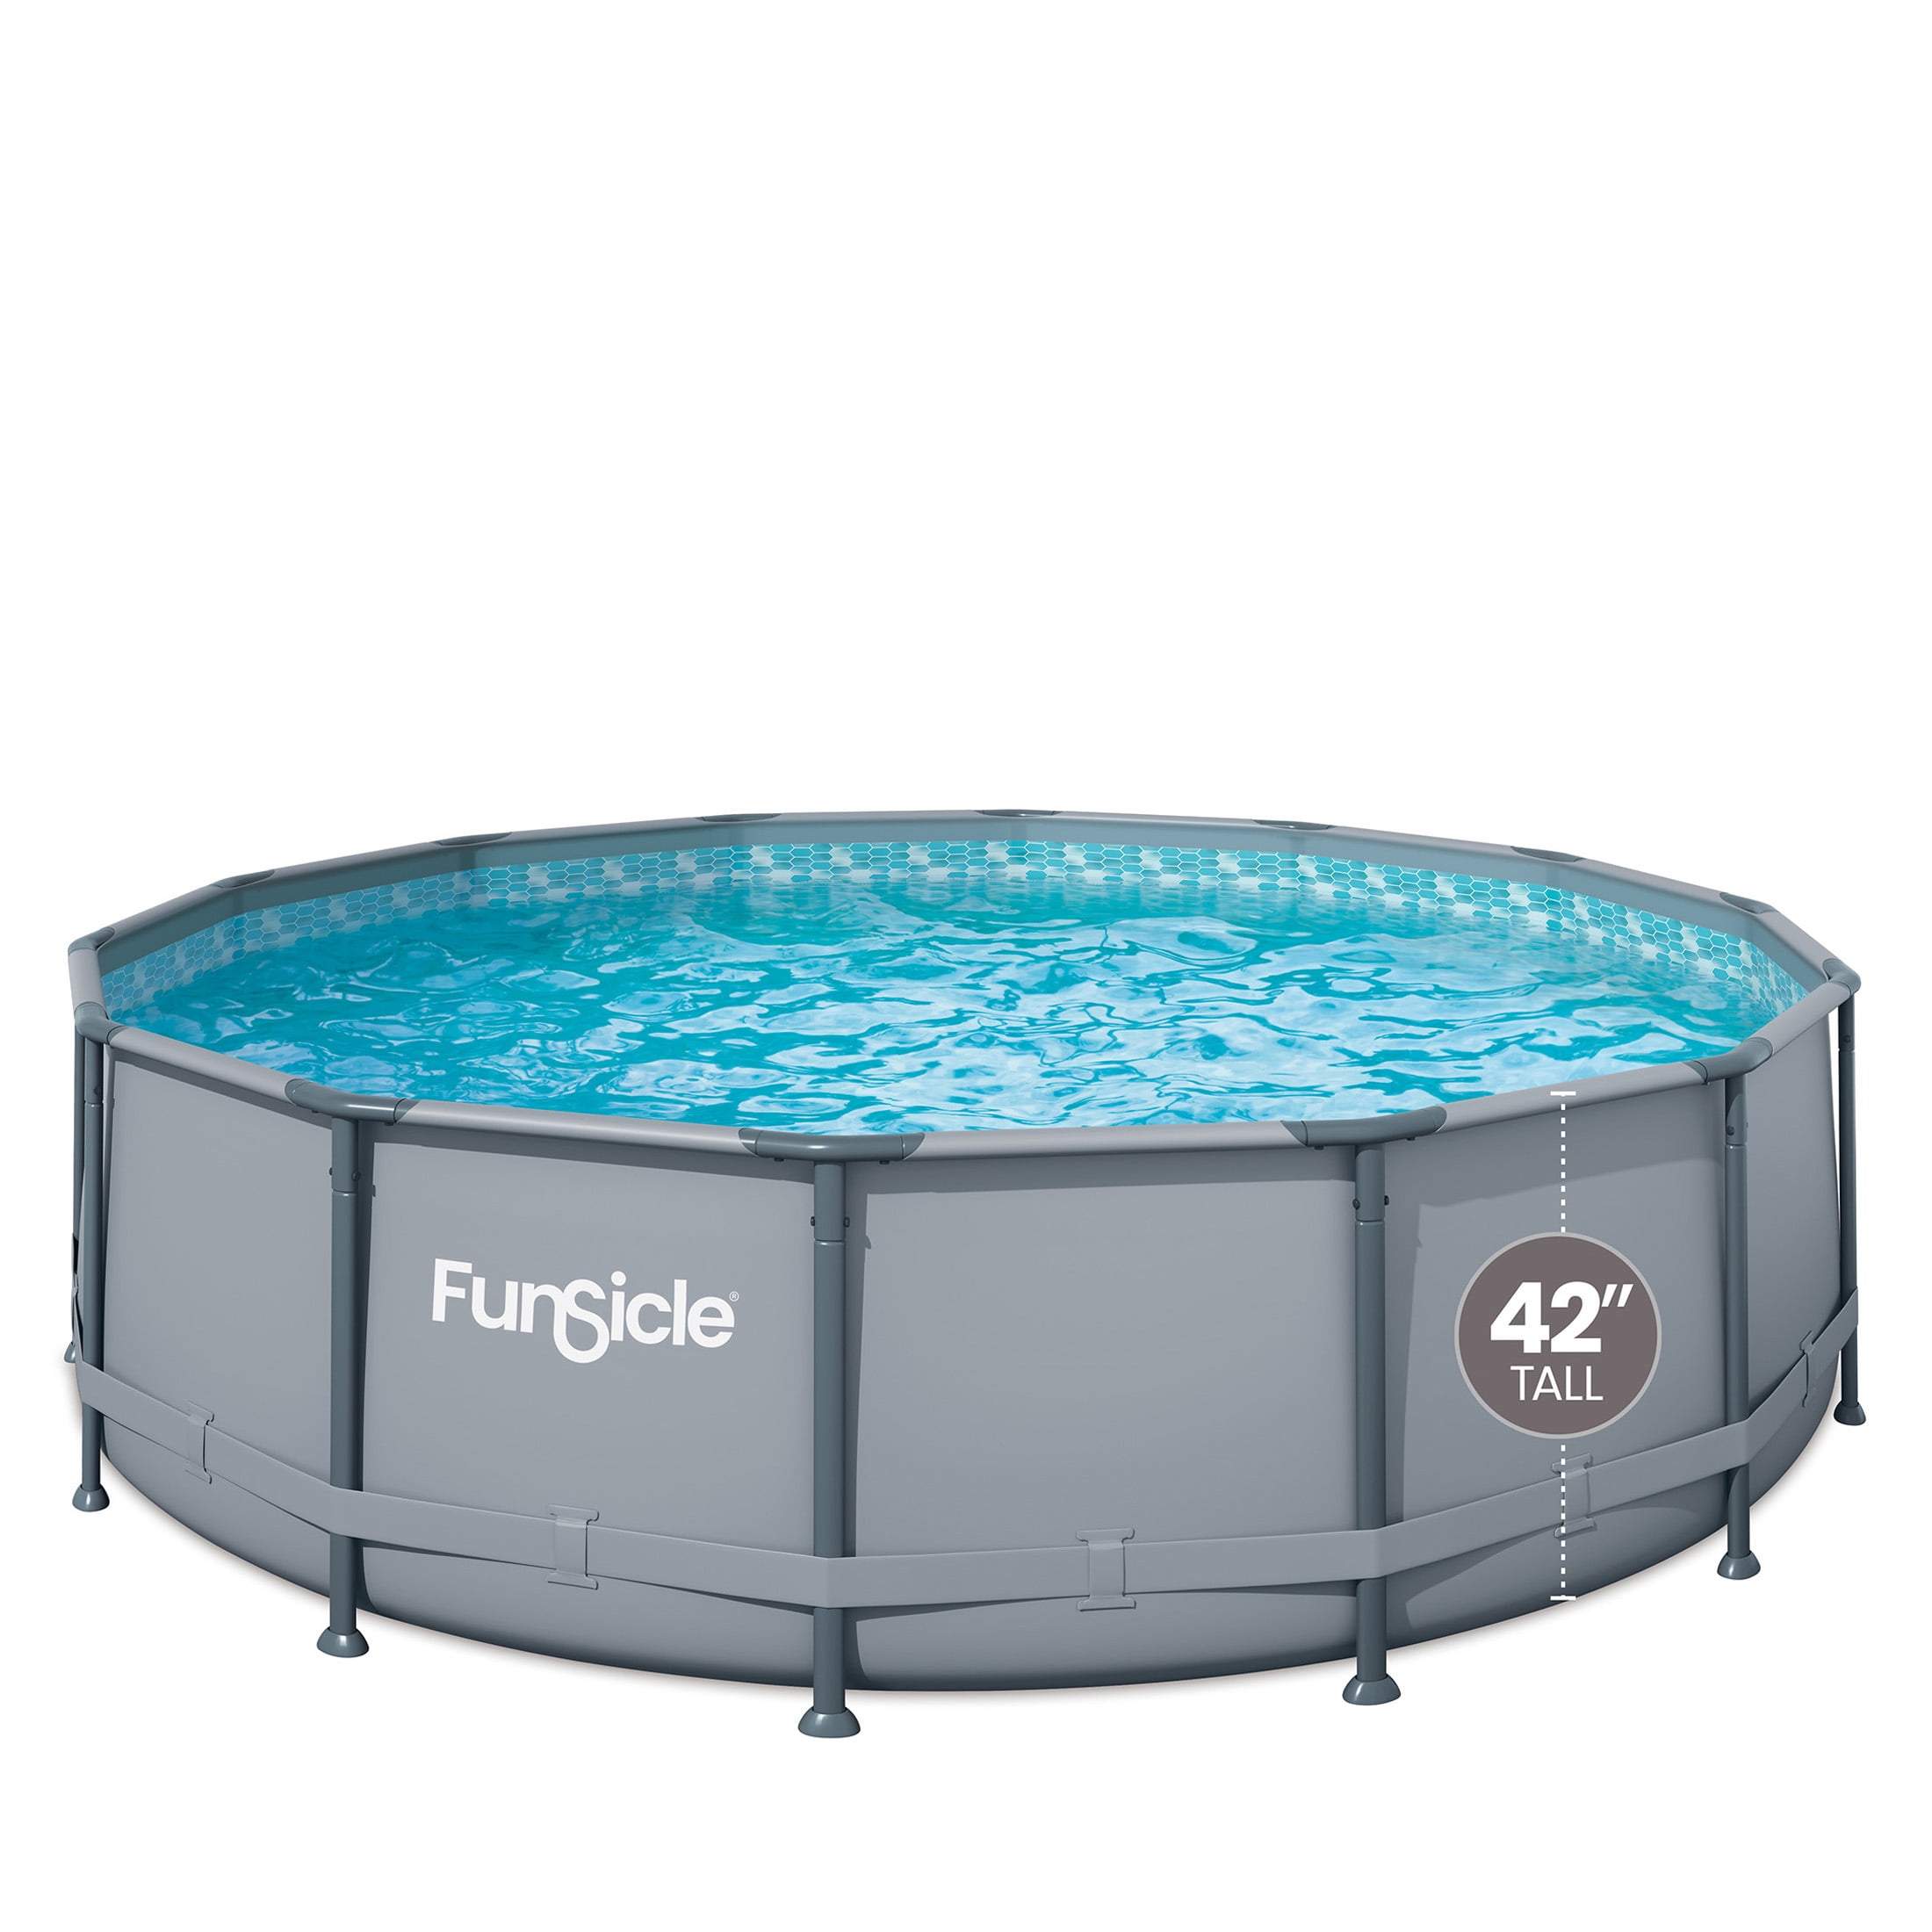 Funsicle 14 ft Oasis Round Above Ground Family Pool, Includes SkimmerPlus Filter Pump, Age 6 & Up